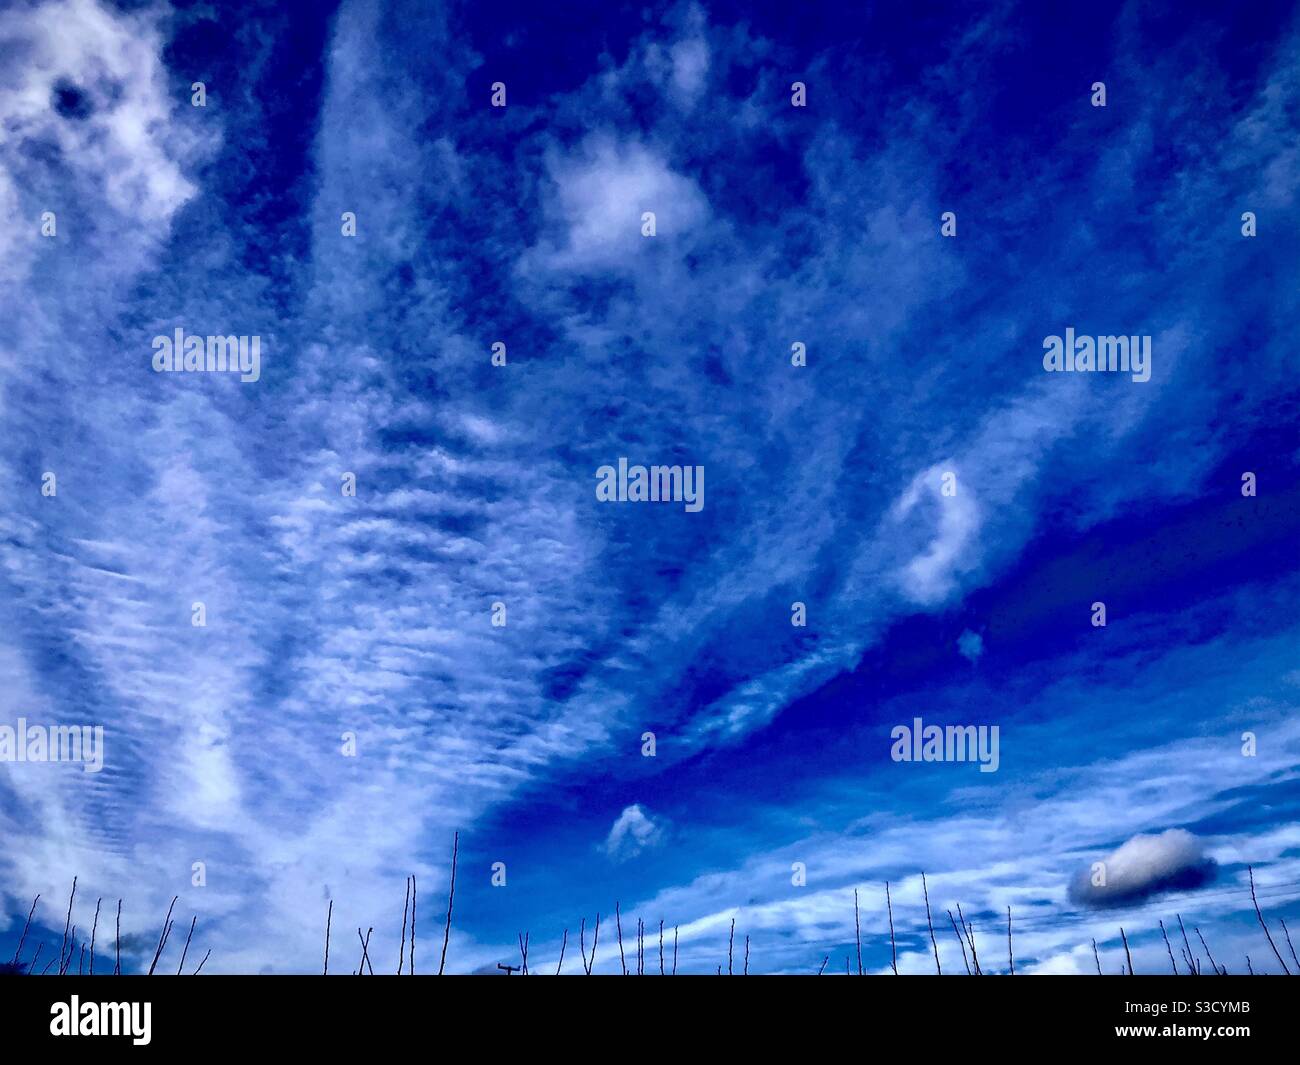 Dramatic perspective of blue sky with variety of cloud formations Stock Photo